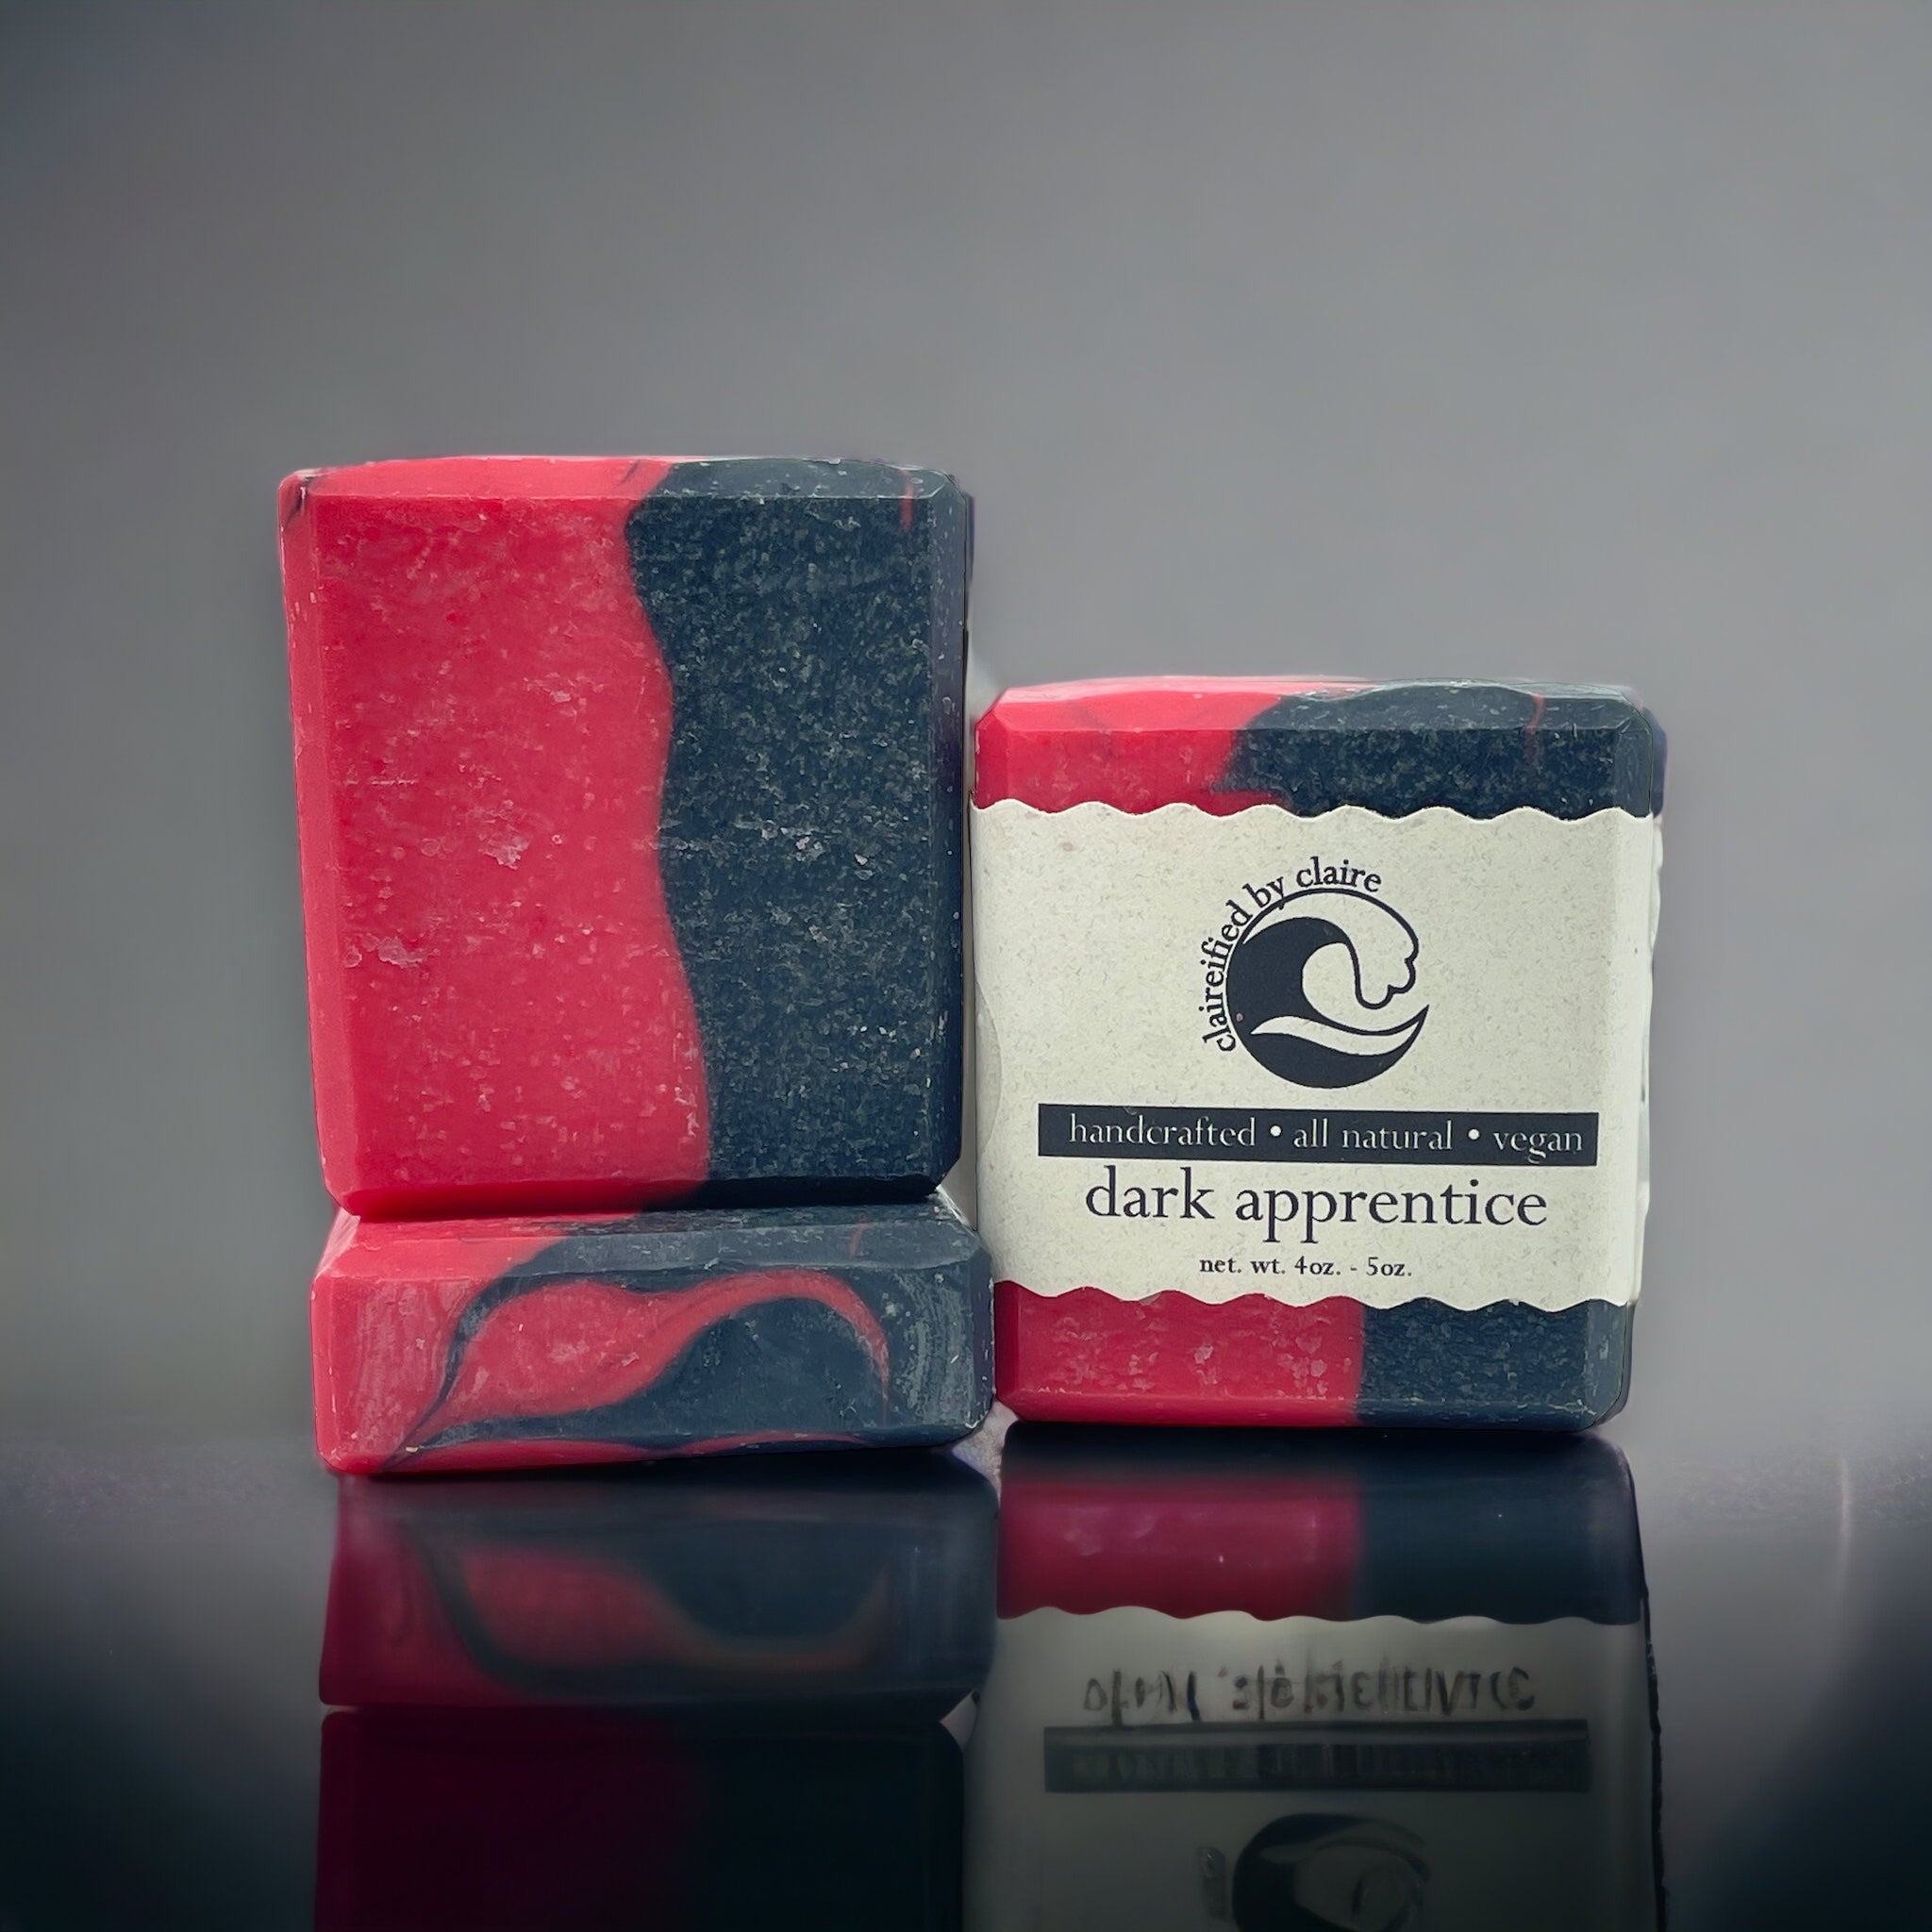 Dark Apprentice handmade soap inspired by Darth Maul from the Star Wars universe